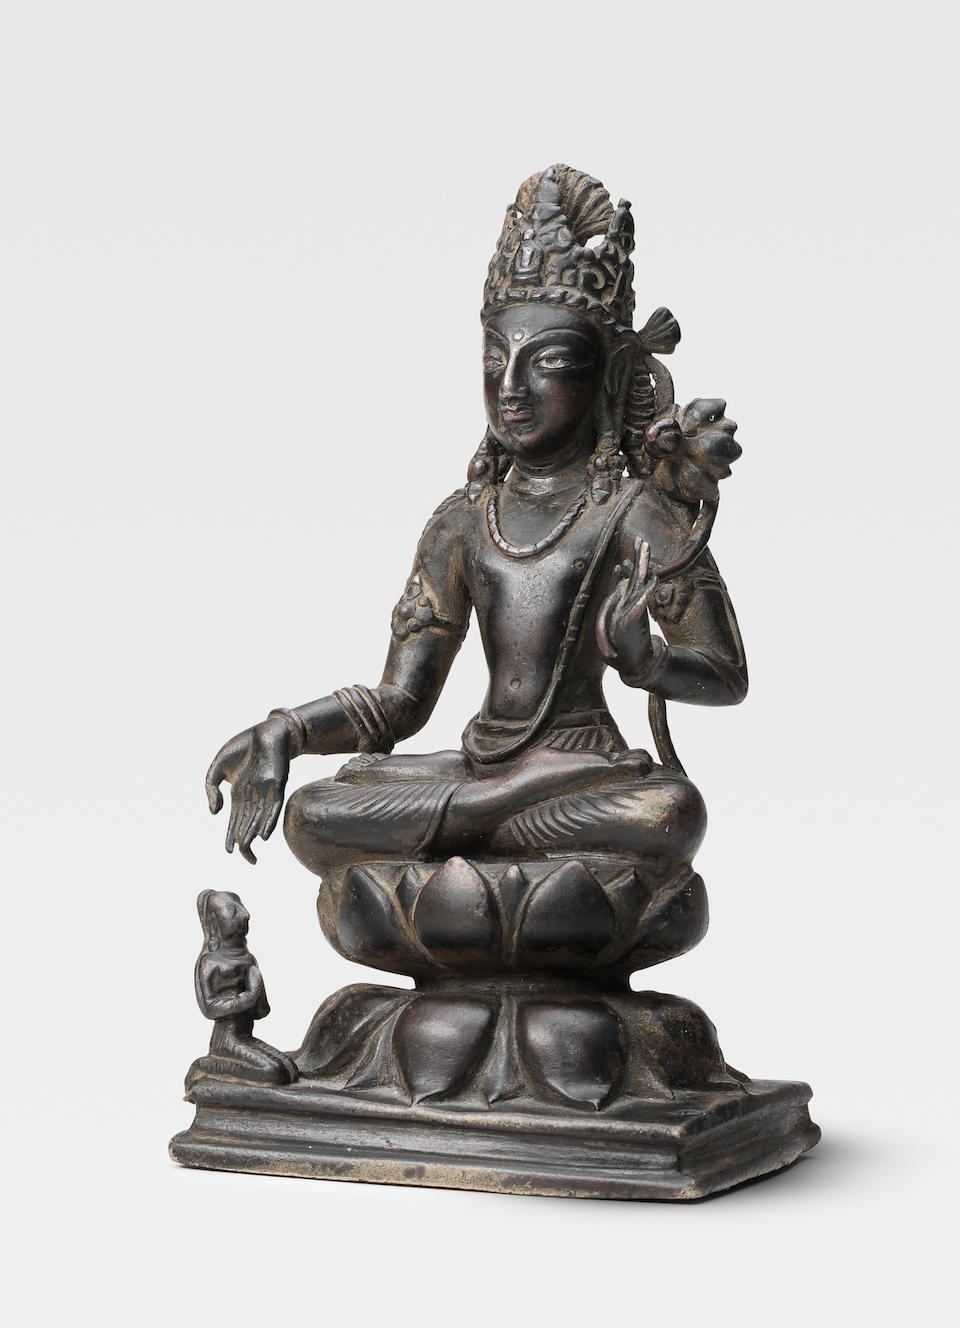 A SILVER INLAID COPPER ALLOY FIGURE OF AVALOKITESHVARA SWAT VALLEY, 6TH/7TH CENTURY